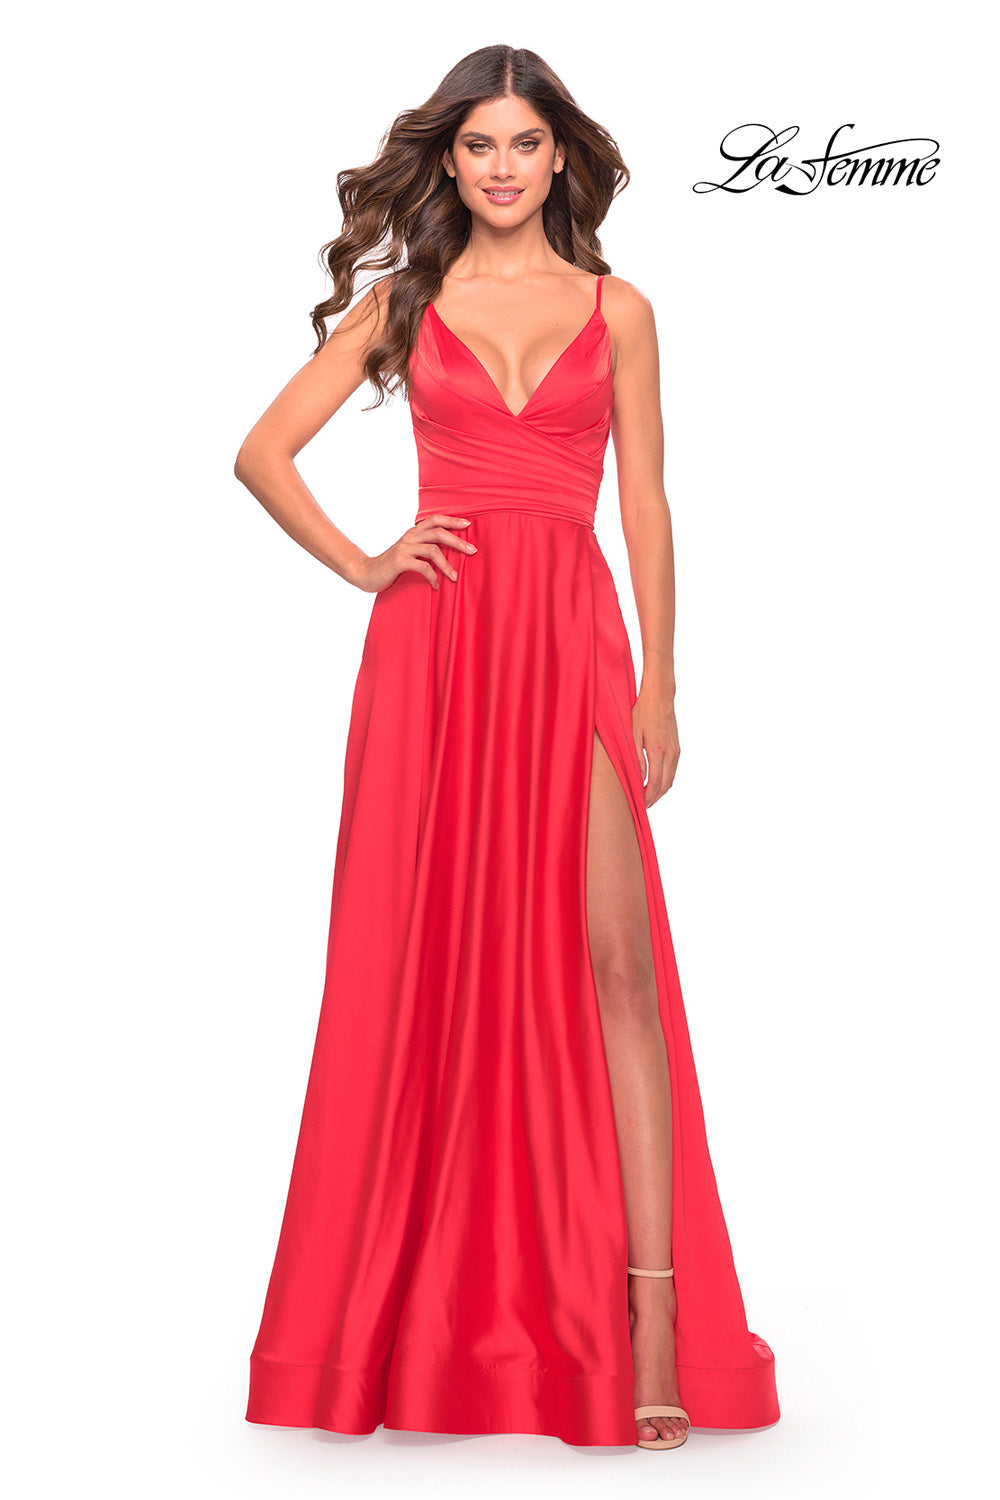 La Femme 31121 prom dress images.  La Femme 31121 is available in these colors: Hot Coral, Neon Pink.